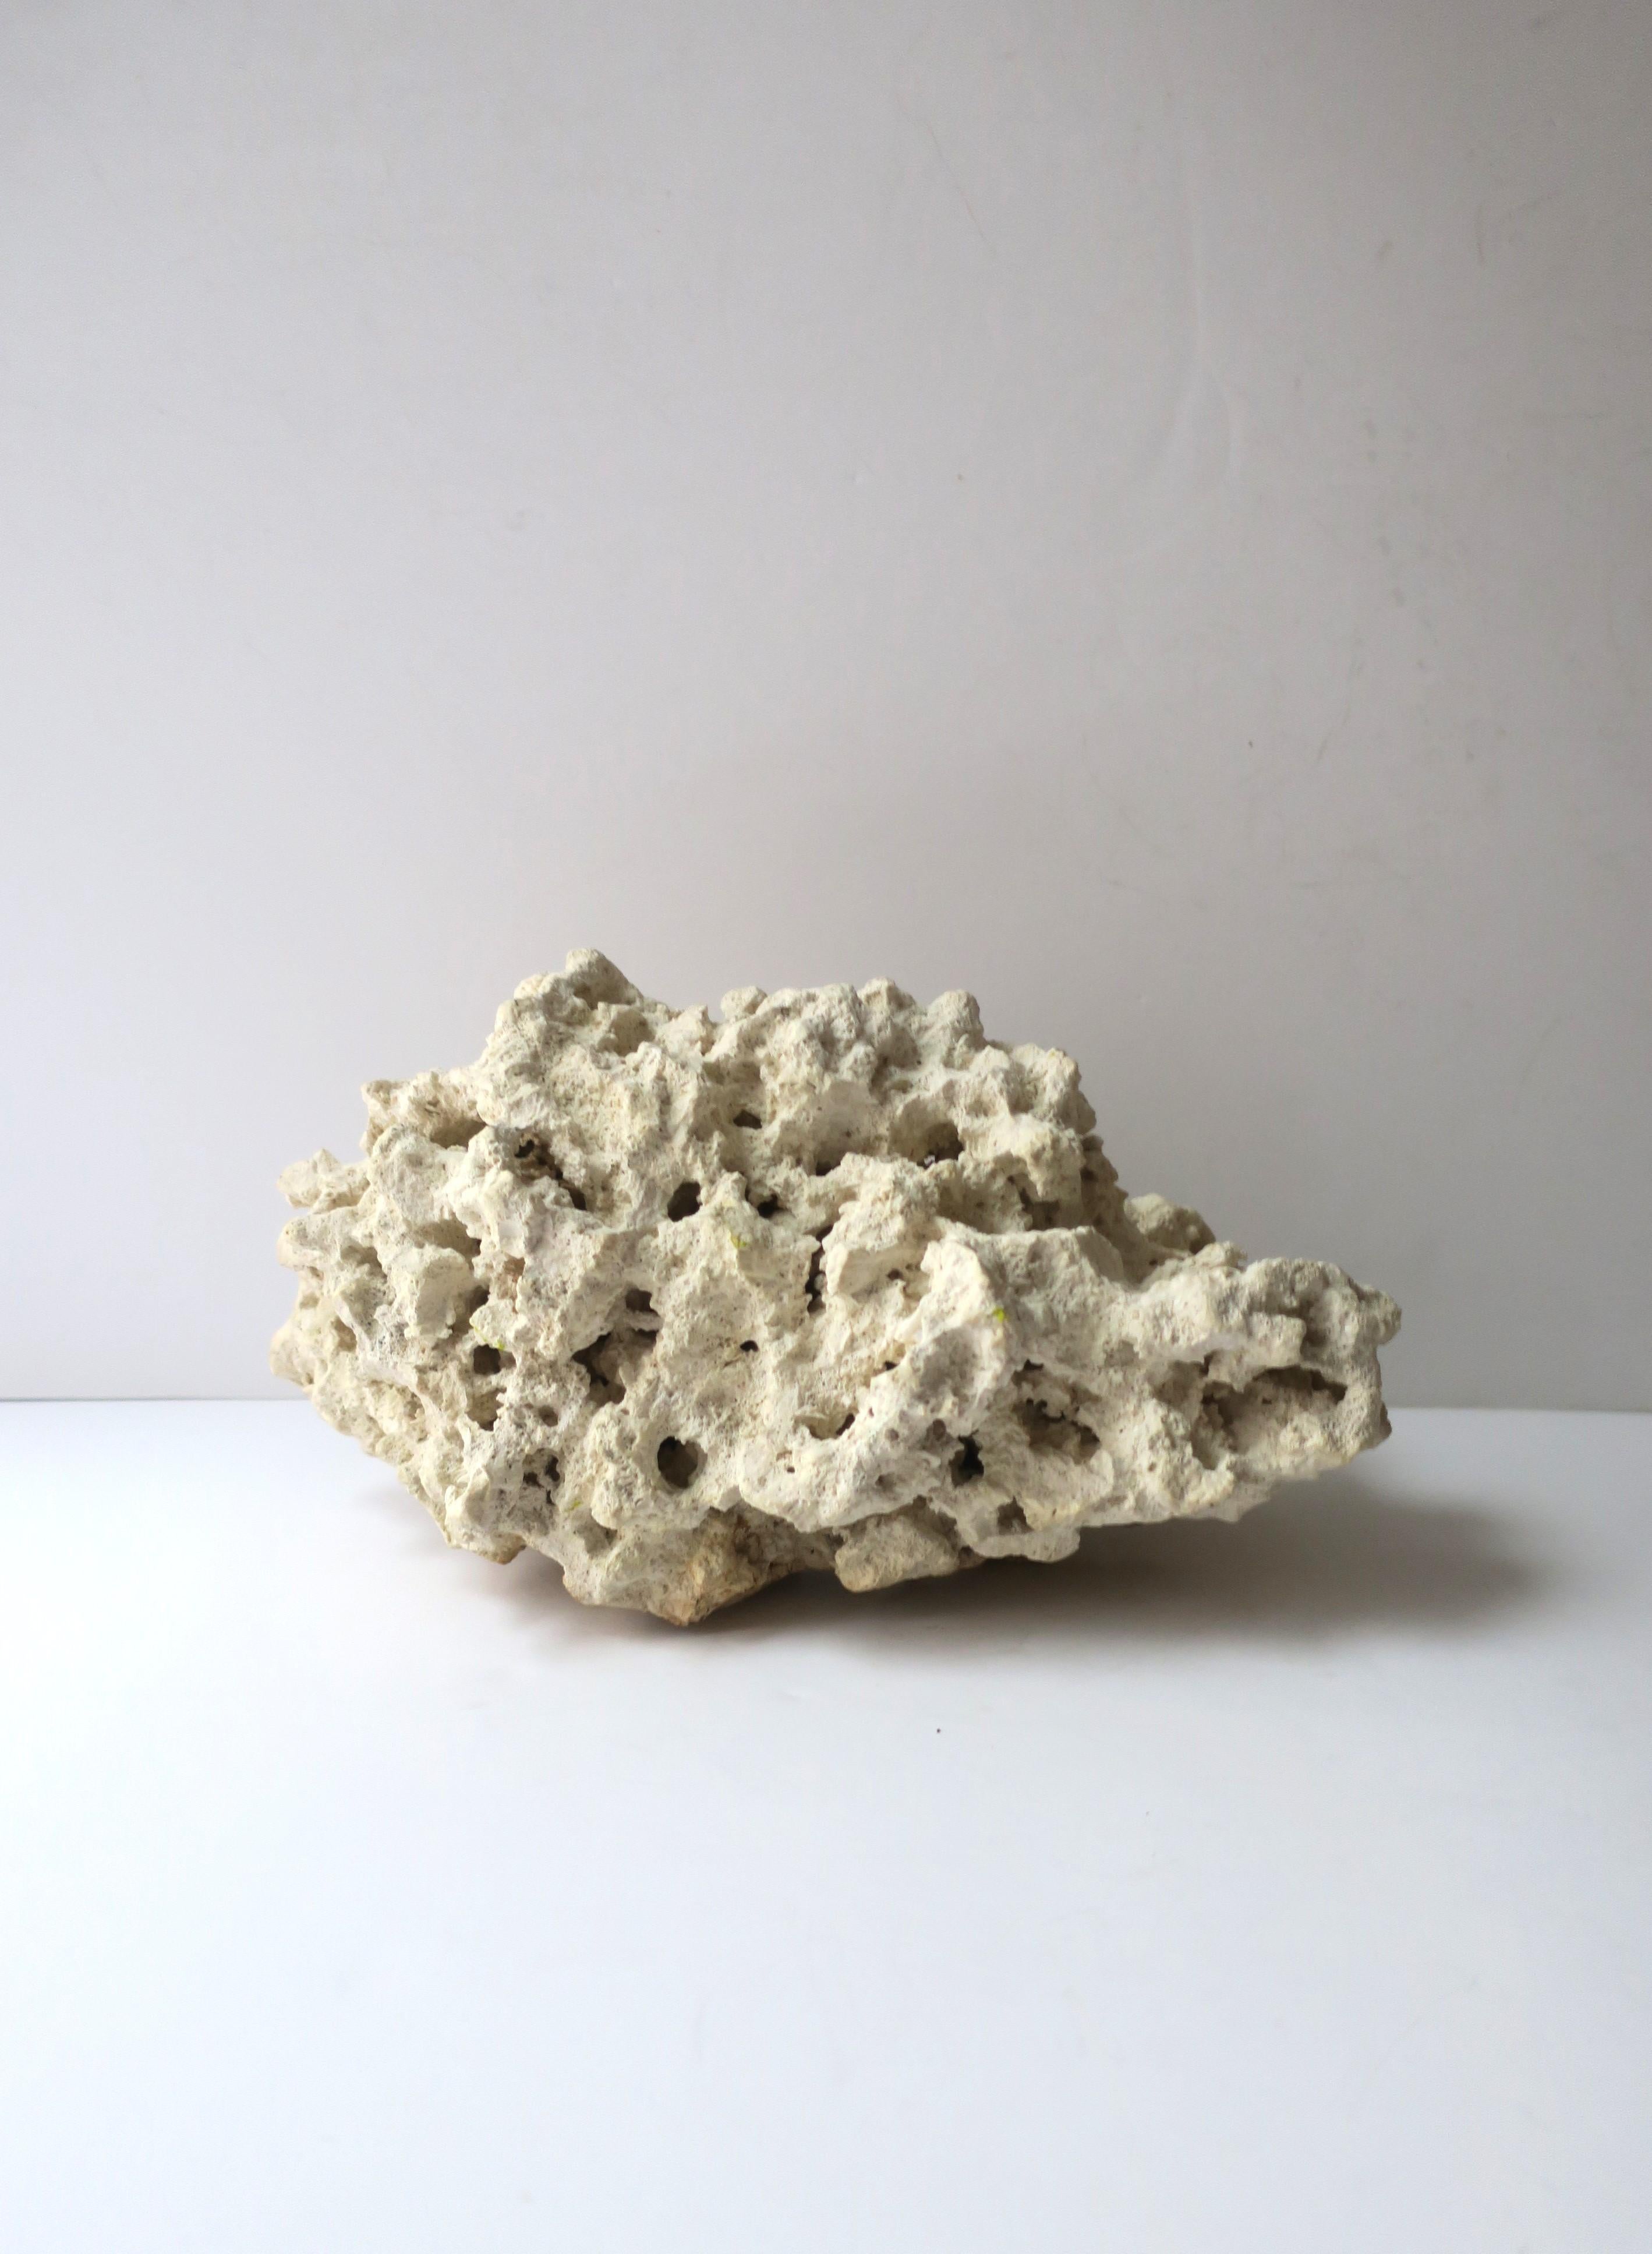 A natural fragment piece of coral from the sea/ocean. Use as a standalone decorative object, centerpiece, on a shelf, as a bookend, as a luxury display piece, etc. Natural white/cream white hue. Dimensions: 5.75